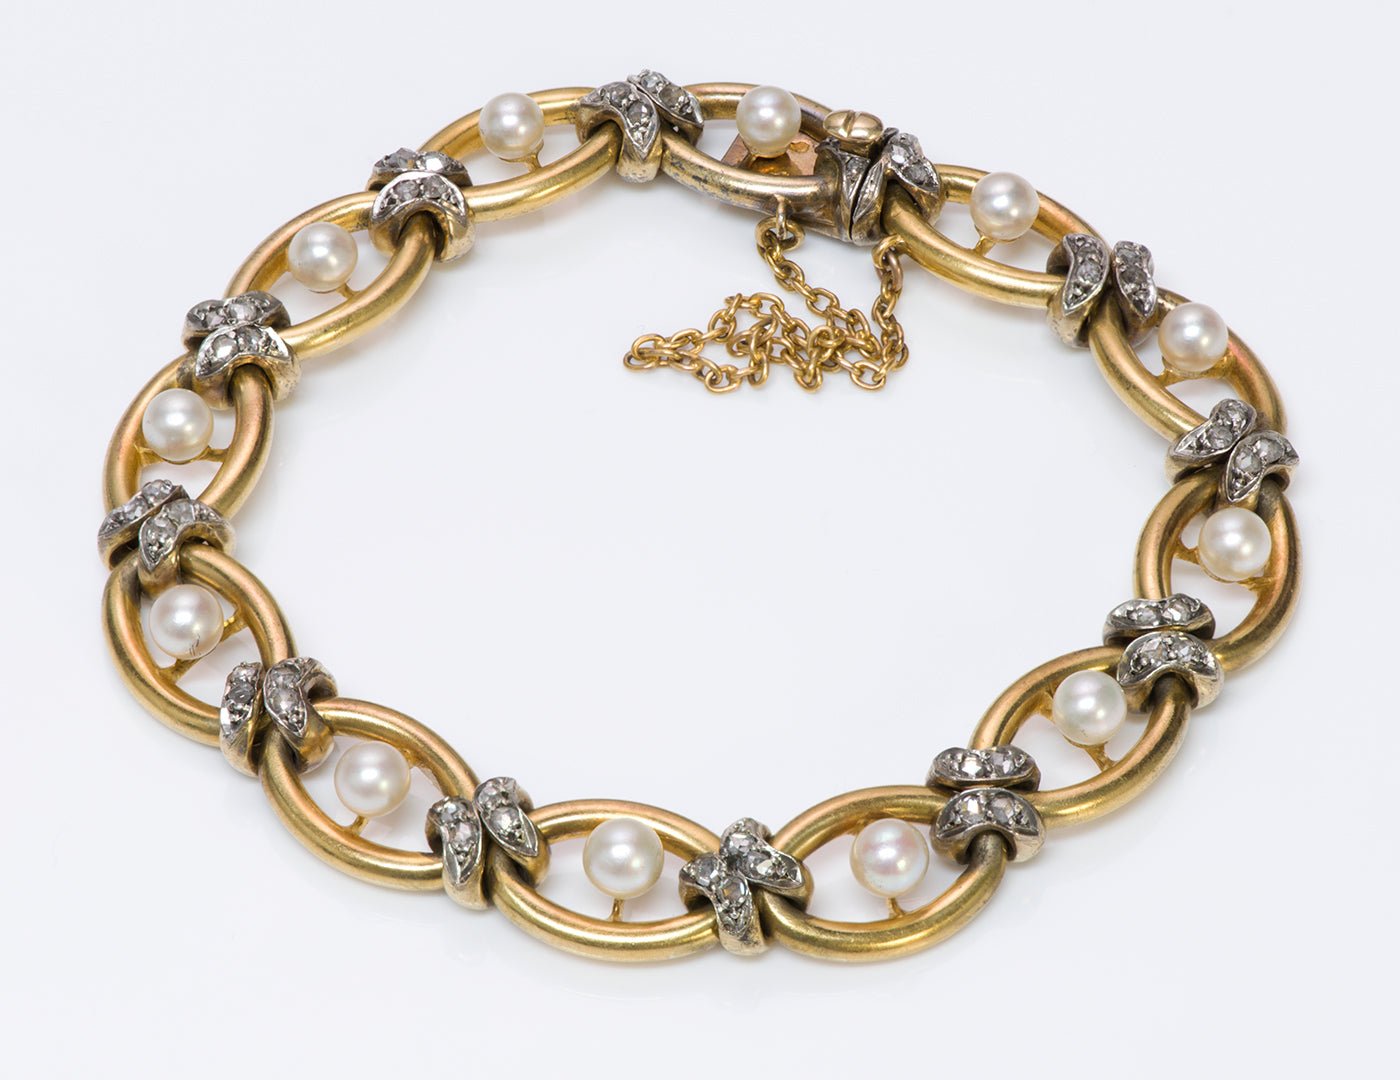 Antique French Gold Diamond & Pearl Bracelet - DSF Antique Jewelry